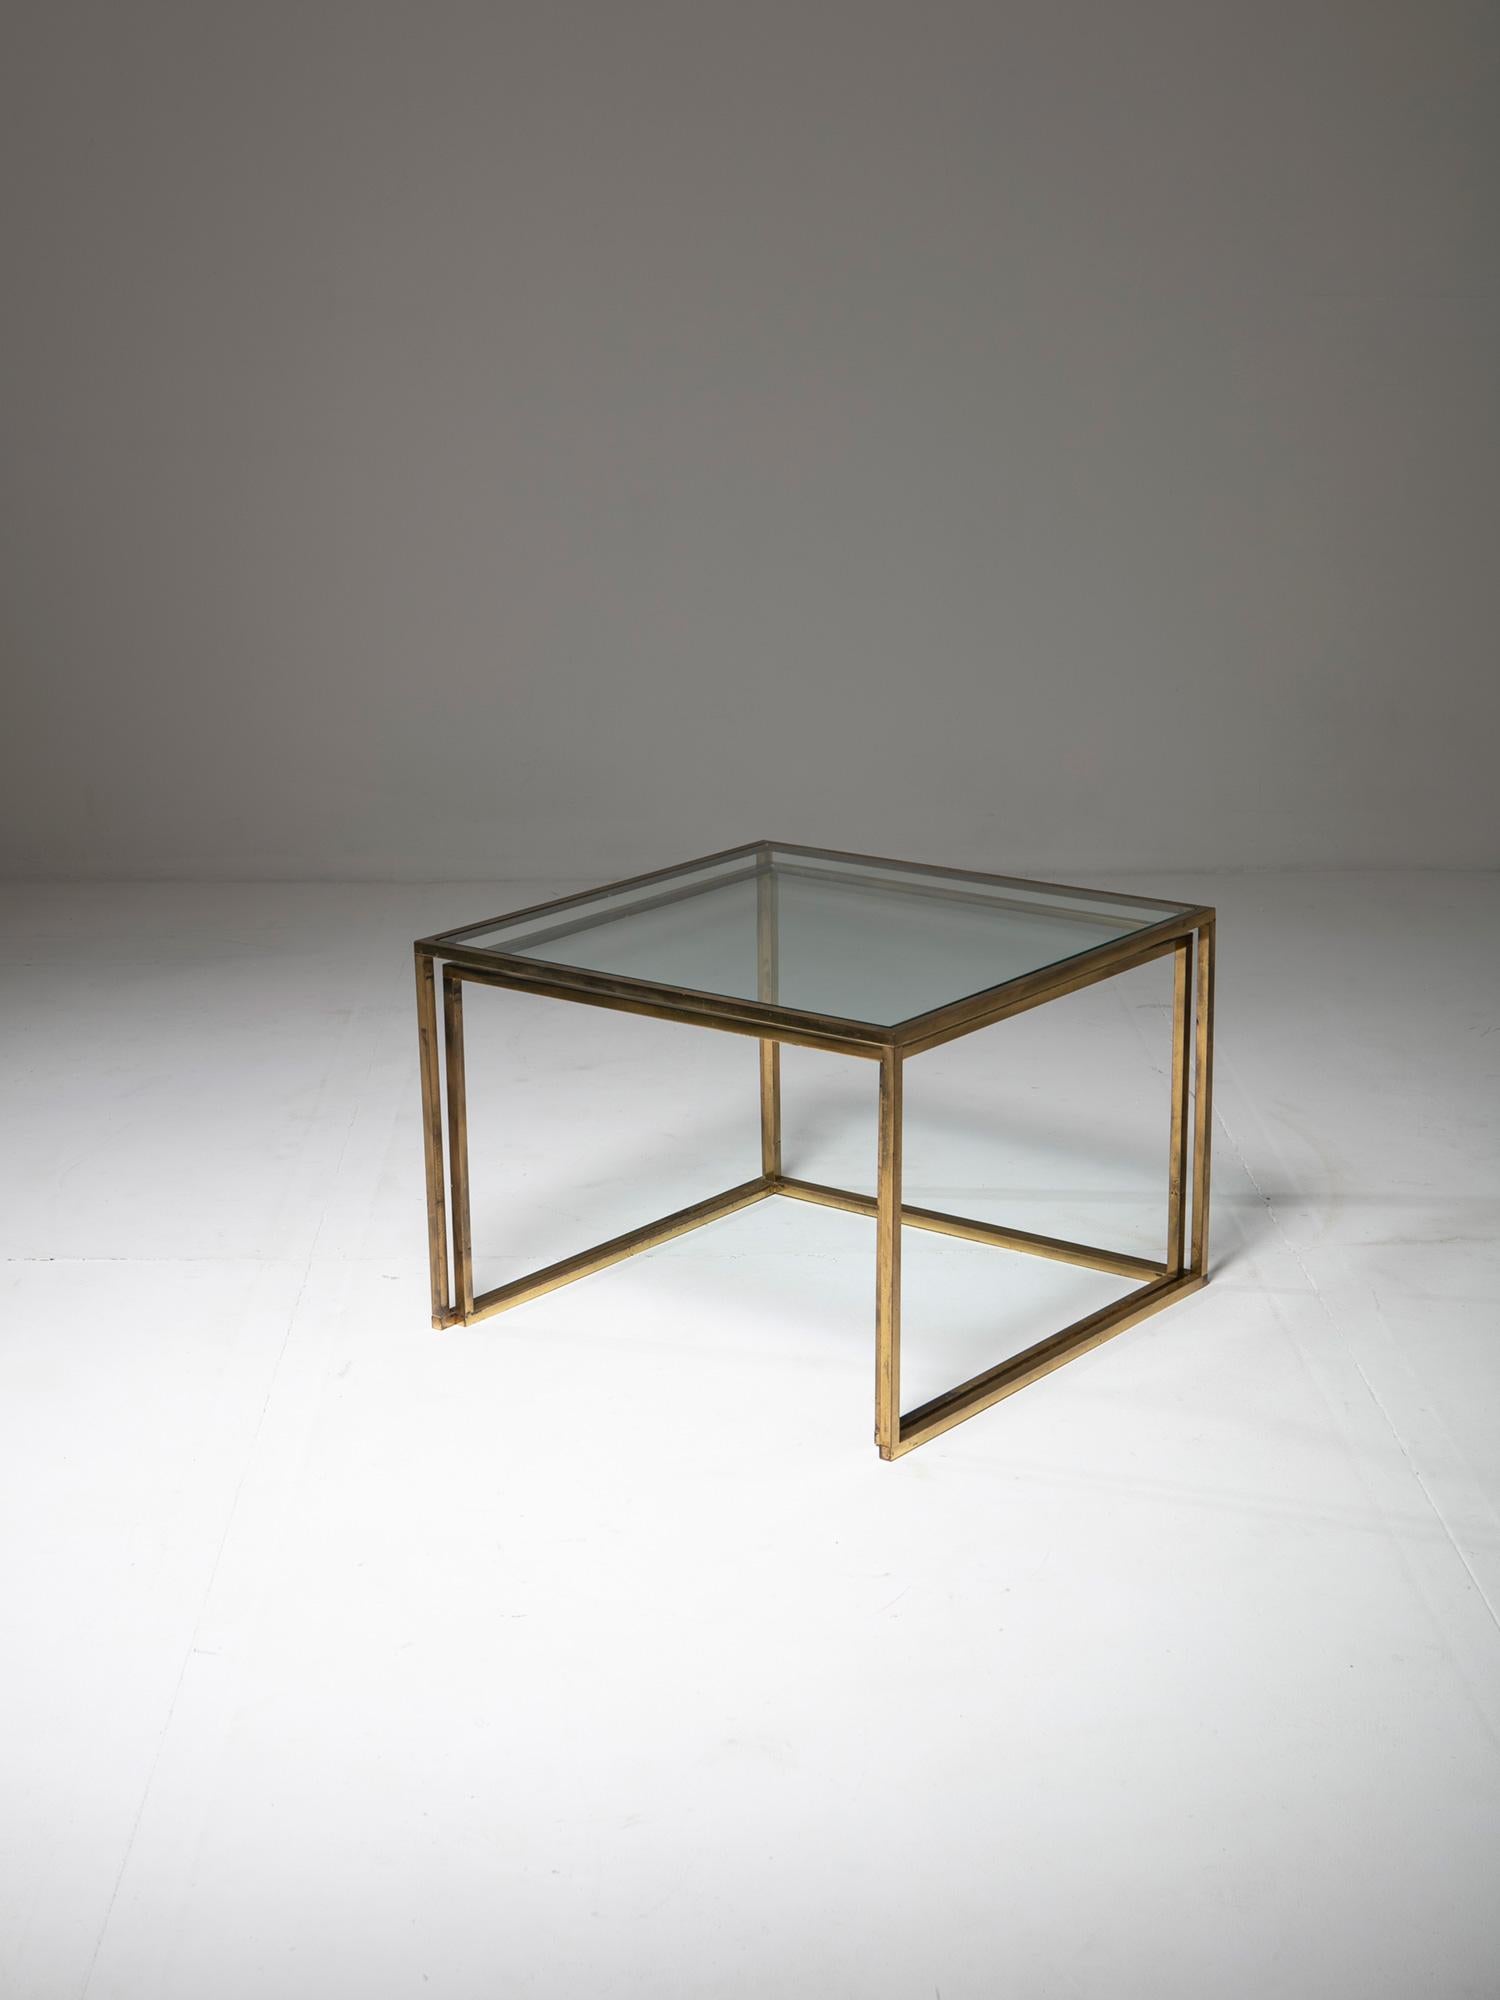 Italian 1970s nesting tables with brass frame and glass top.